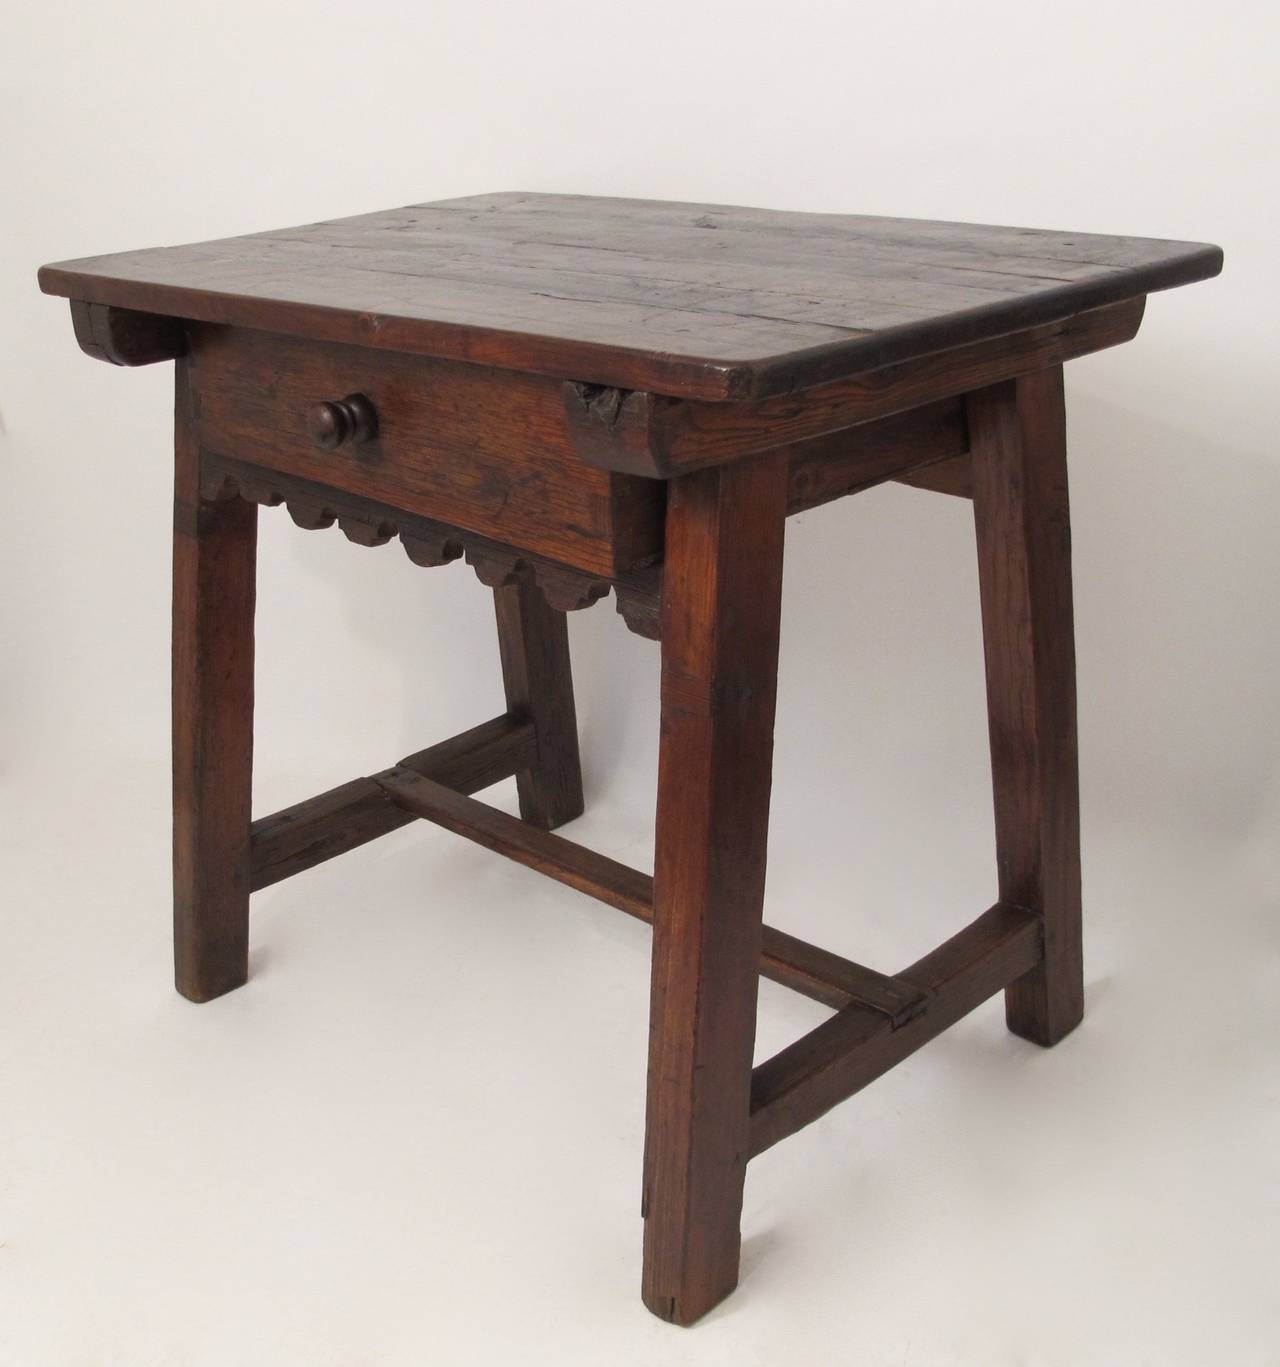 Mesquite and Pine side table with a single drawer. Mexico, late 19th century.